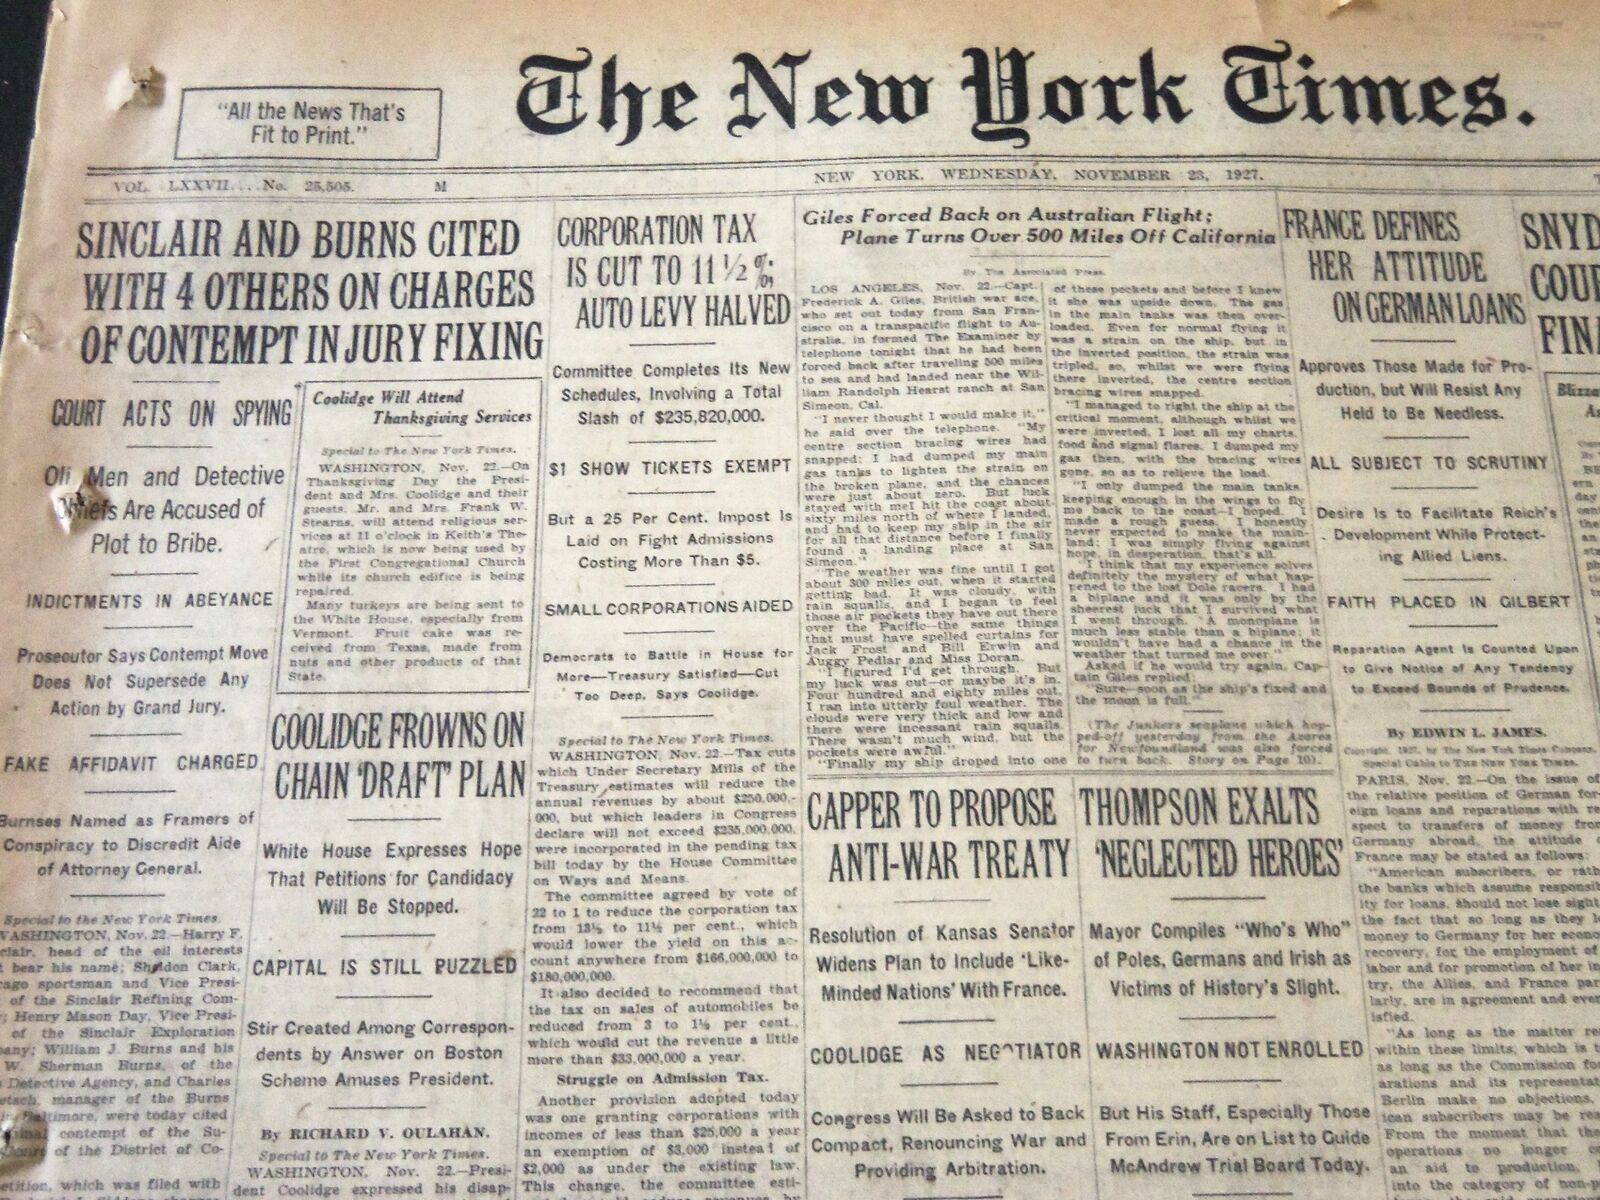 1927 NOV 23 NEW YORK TIMES - SINCLAIR AND BURNS CITED IN JURY FIXING - NT 6401